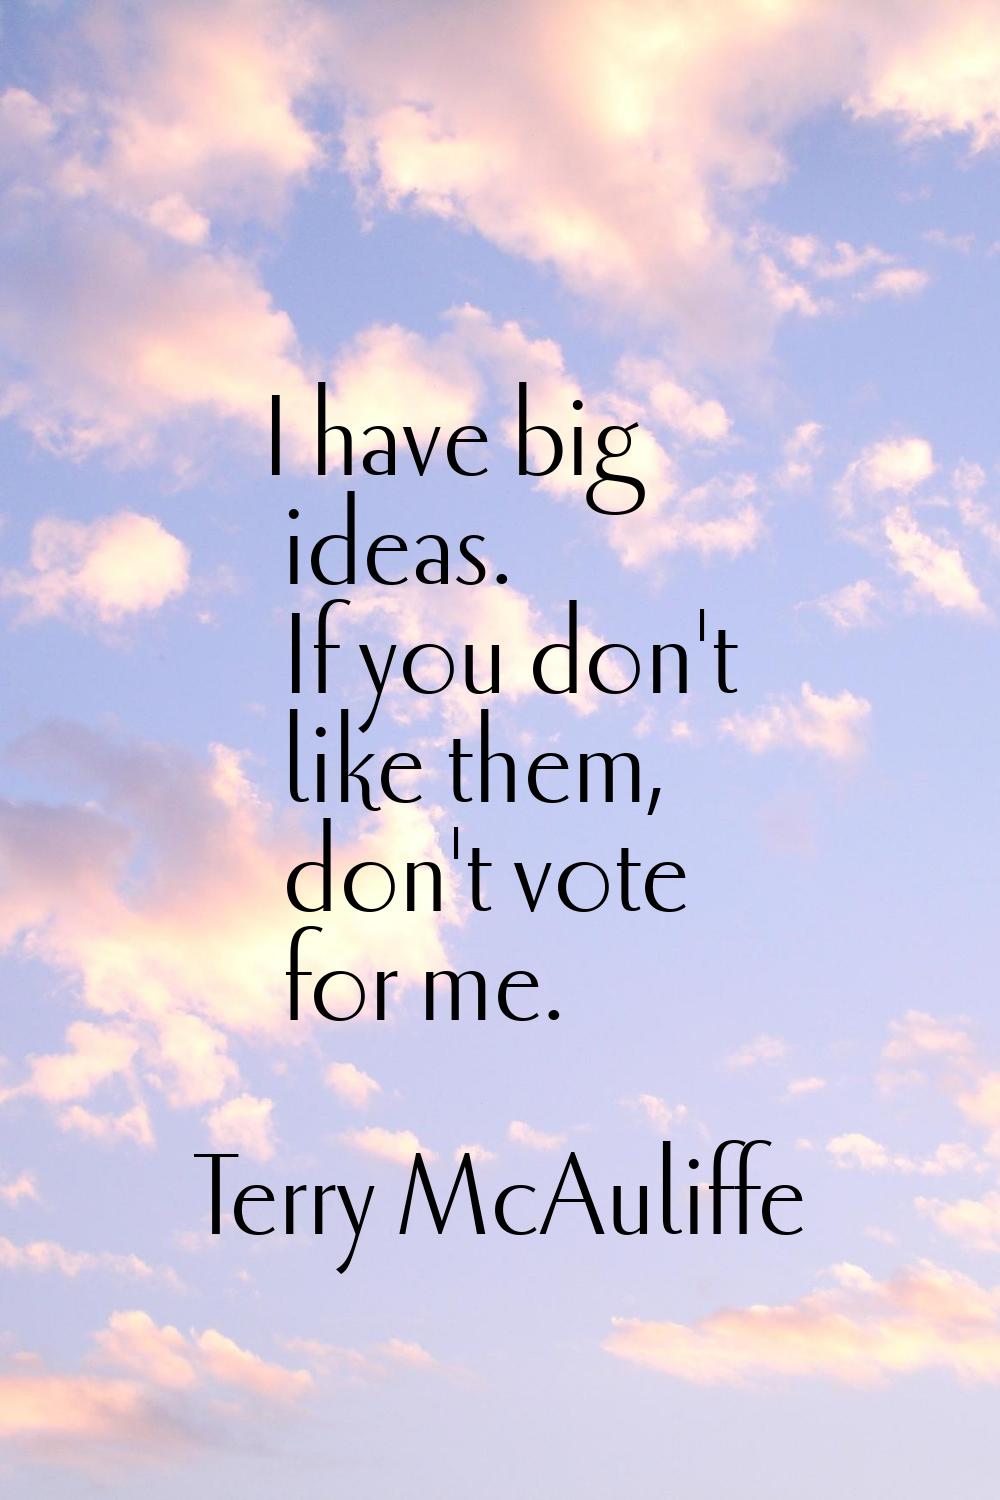 I have big ideas. If you don't like them, don't vote for me.